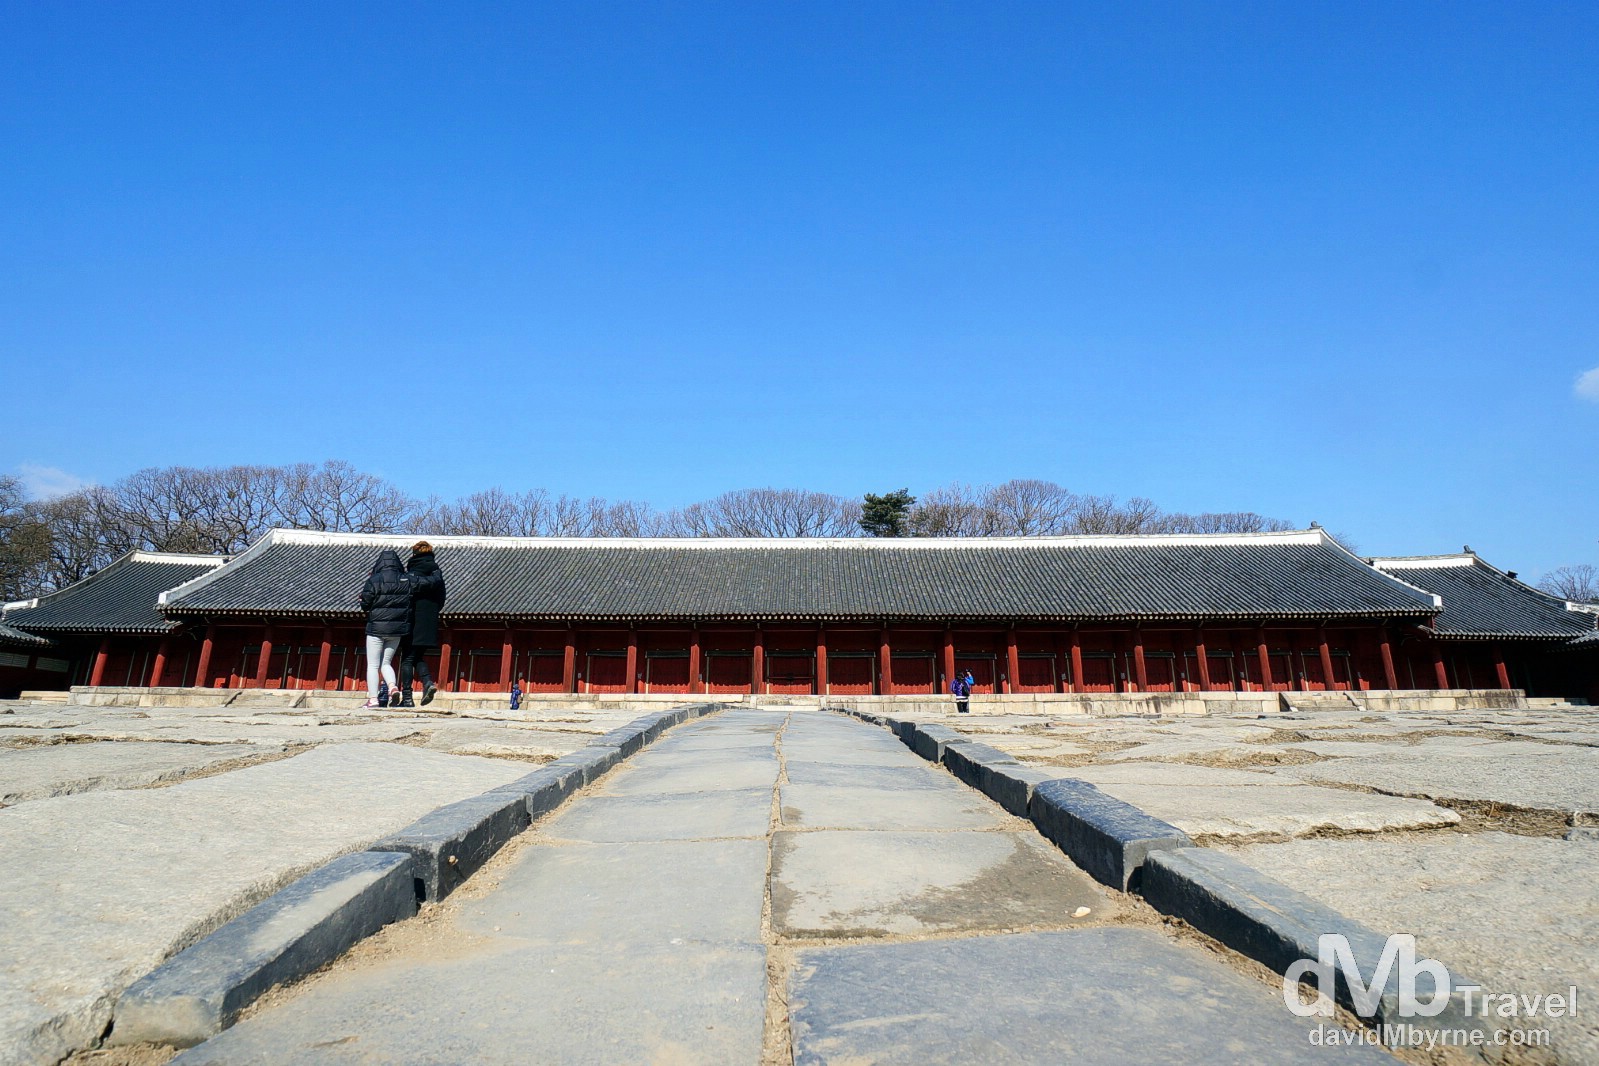 Jeongjeon, the largest building in the UNESCO listed Jongmyo Shrine in Seoul, South Korea. January 18th, 2014.